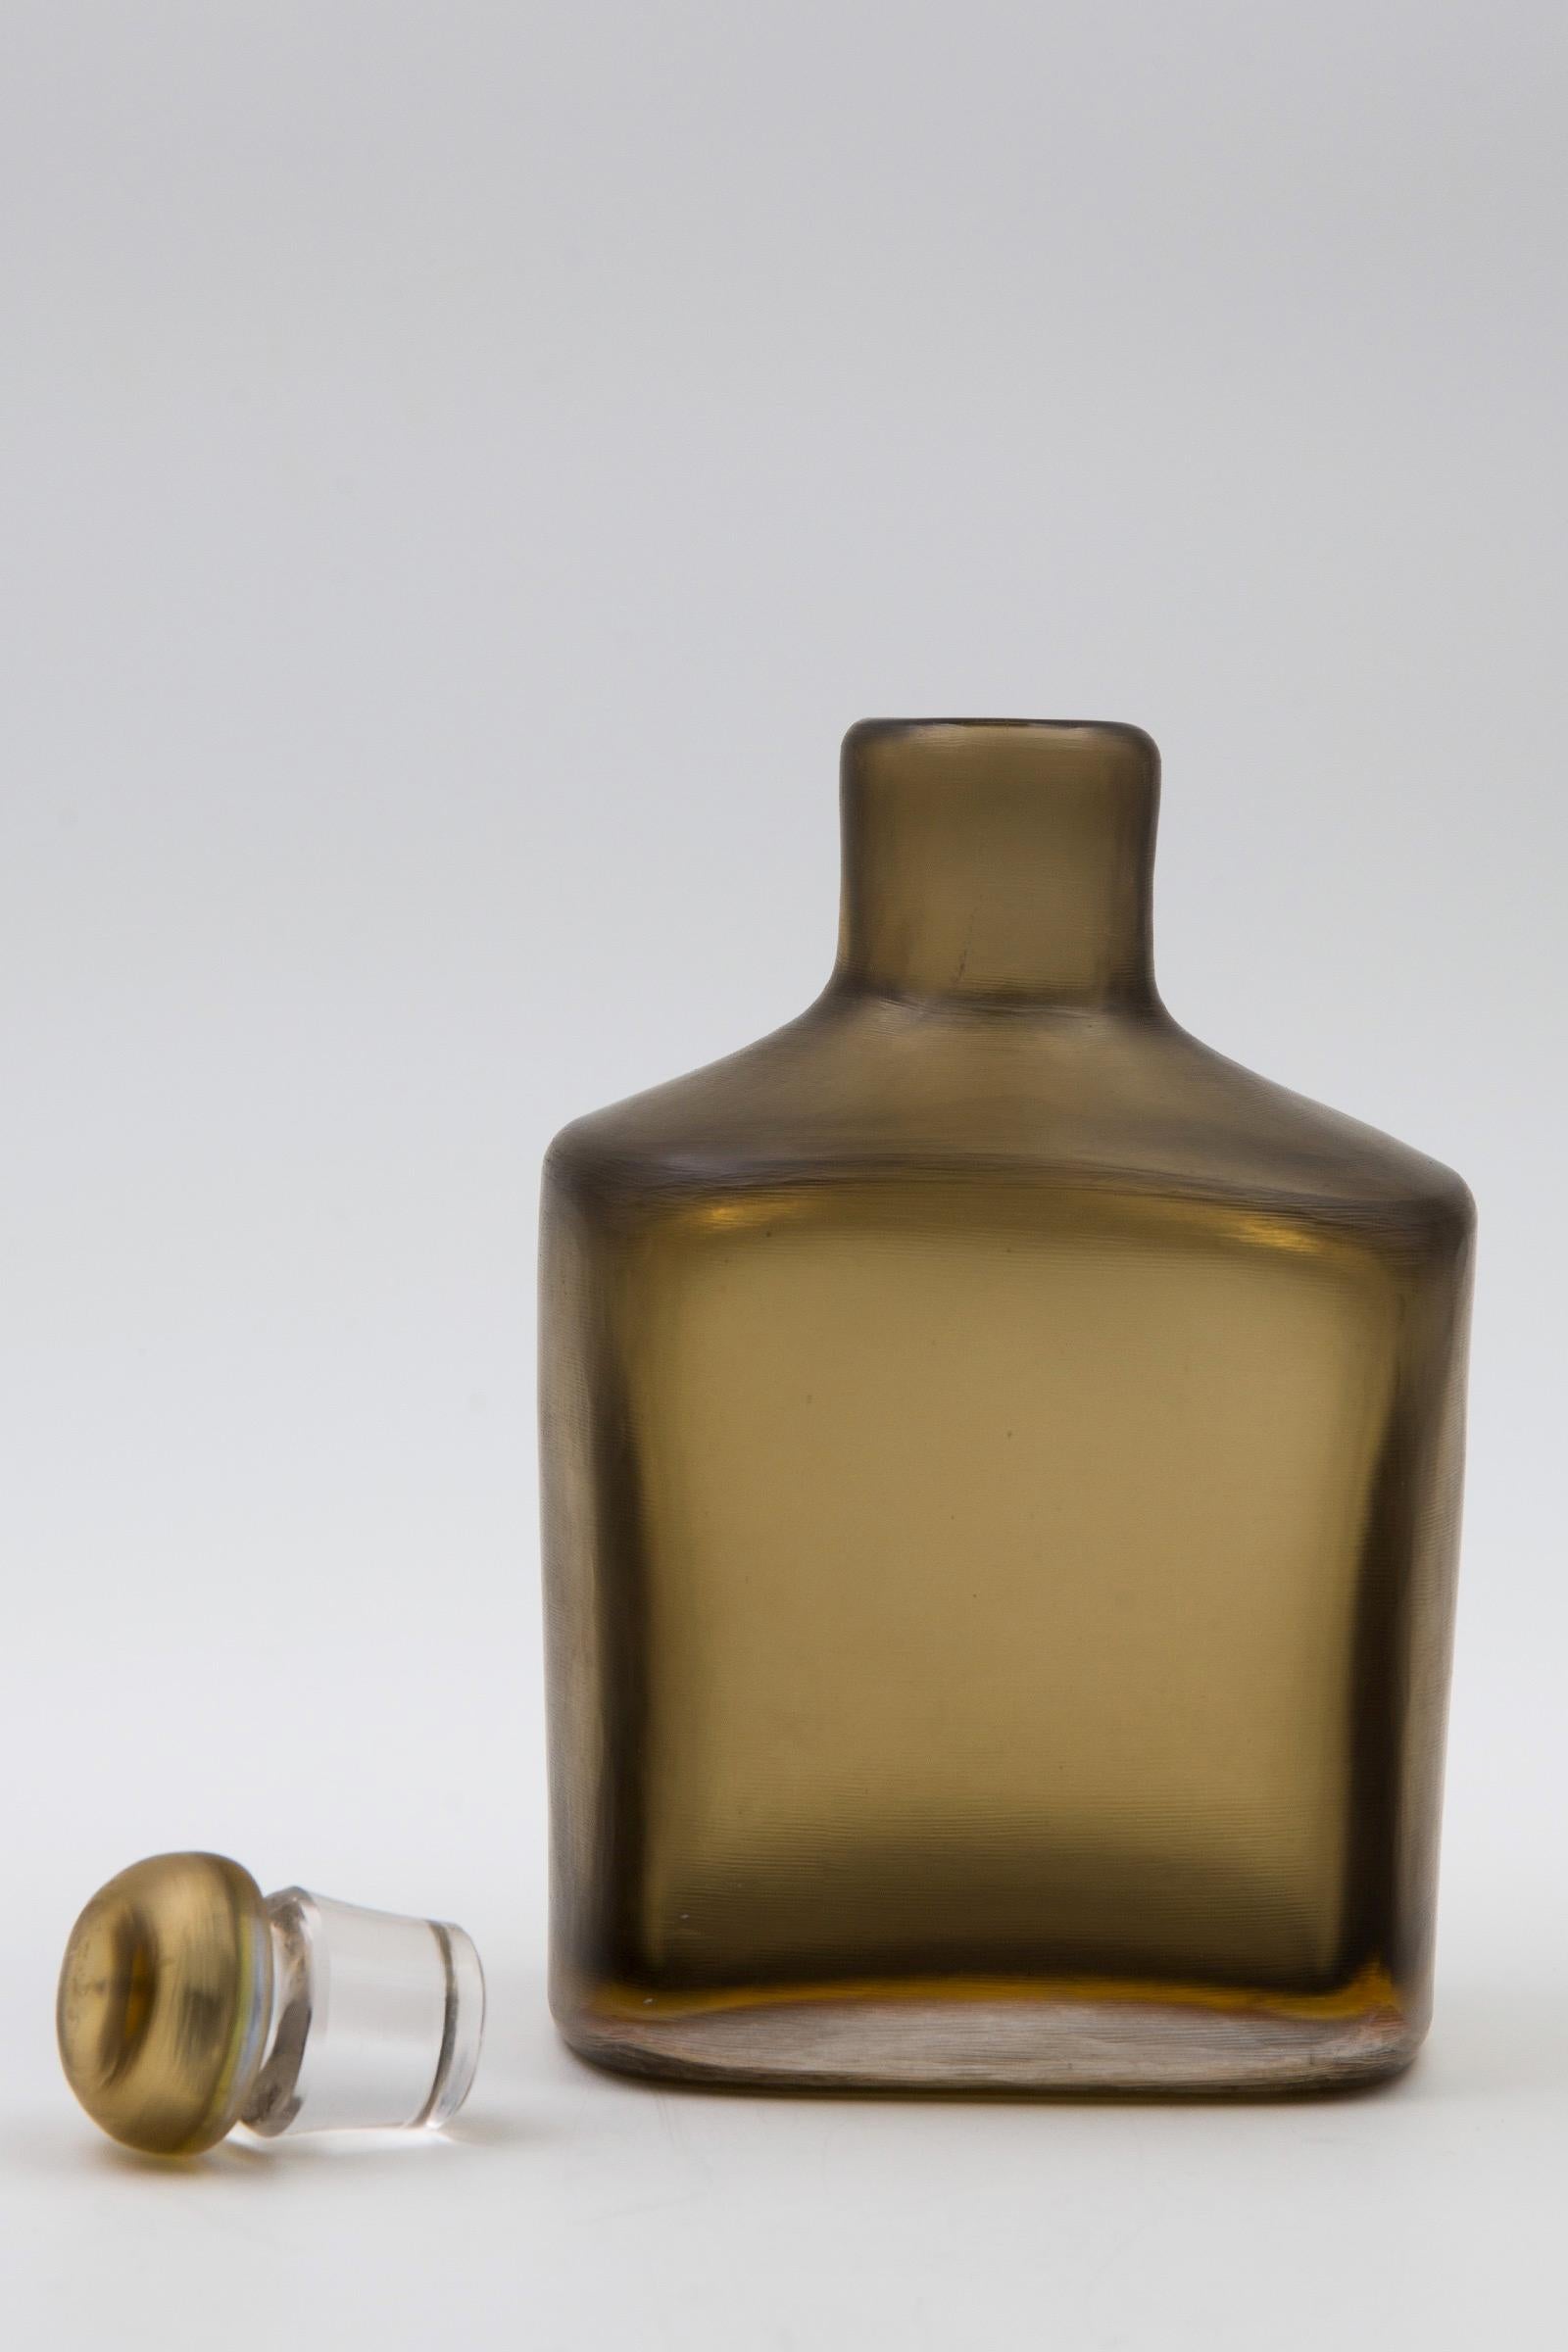 Bottle with stopper in bronze colored pesante glass with a thin layer of yellow glass

The item is finished with horizontal light grinding over the whole surface. This technique has been called by Venini inciso which means incisions in Italian